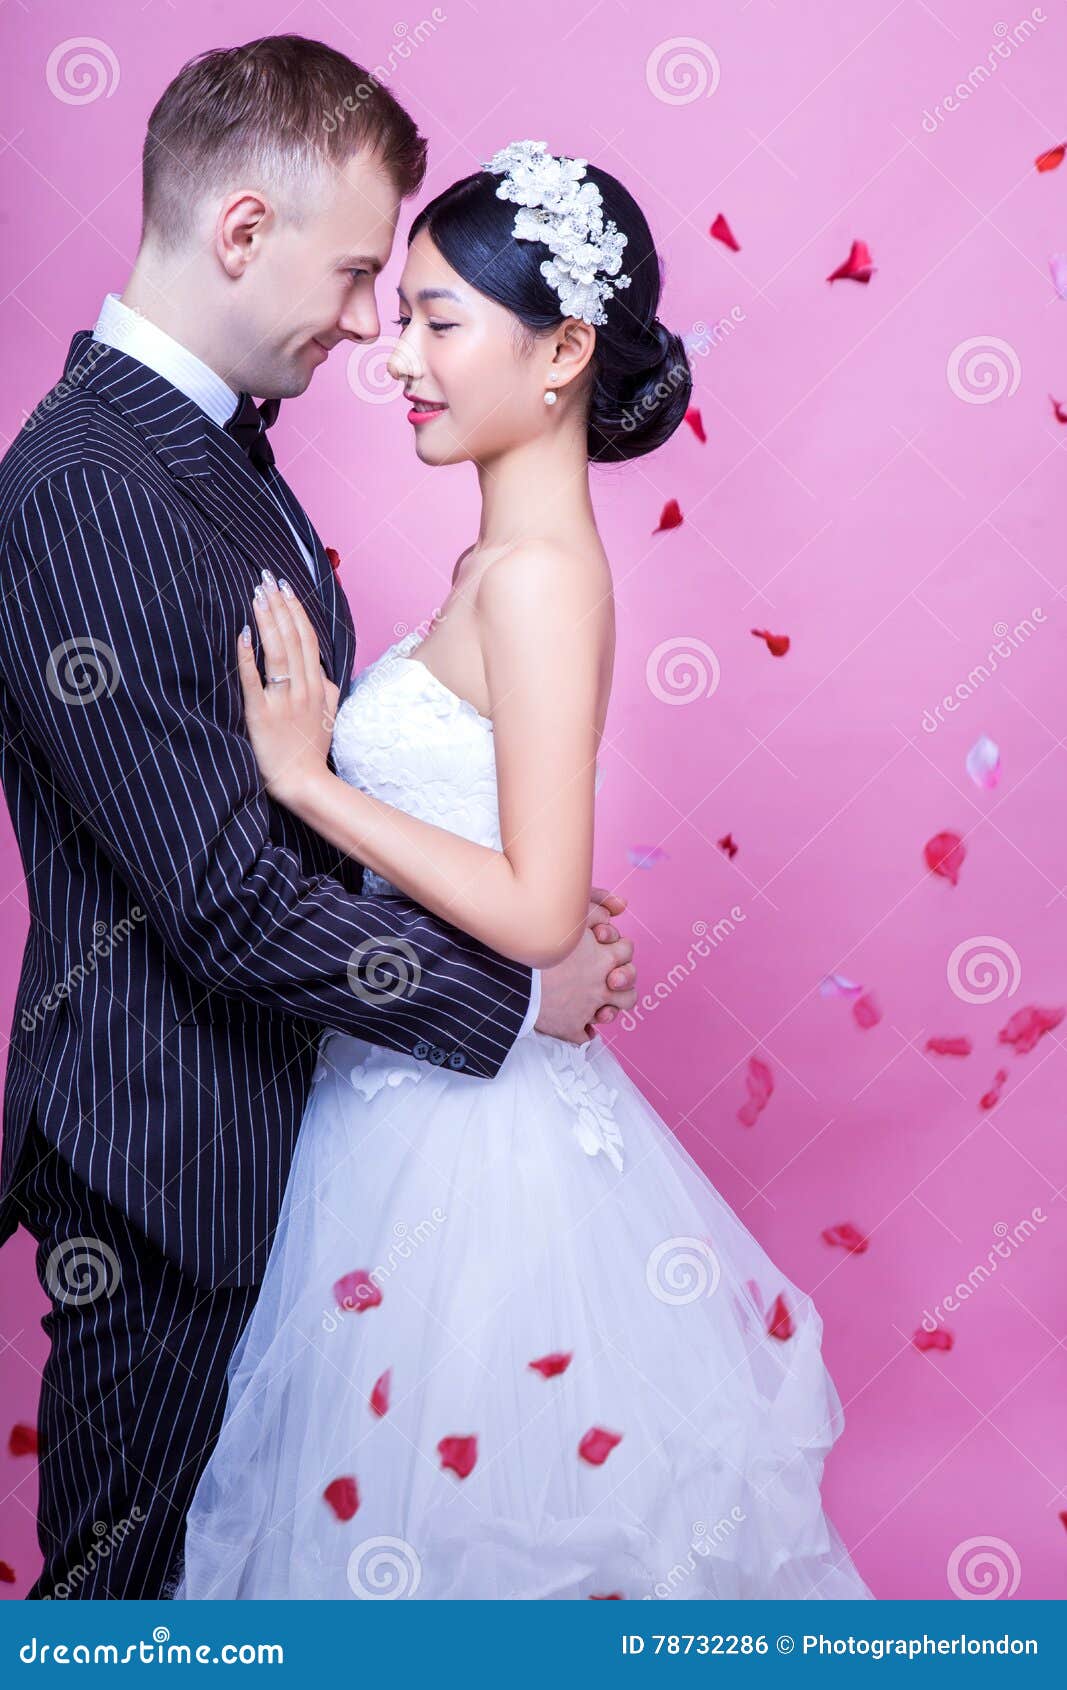 Side View Of Romantic Wedding Couple Embracing Against Pink Background